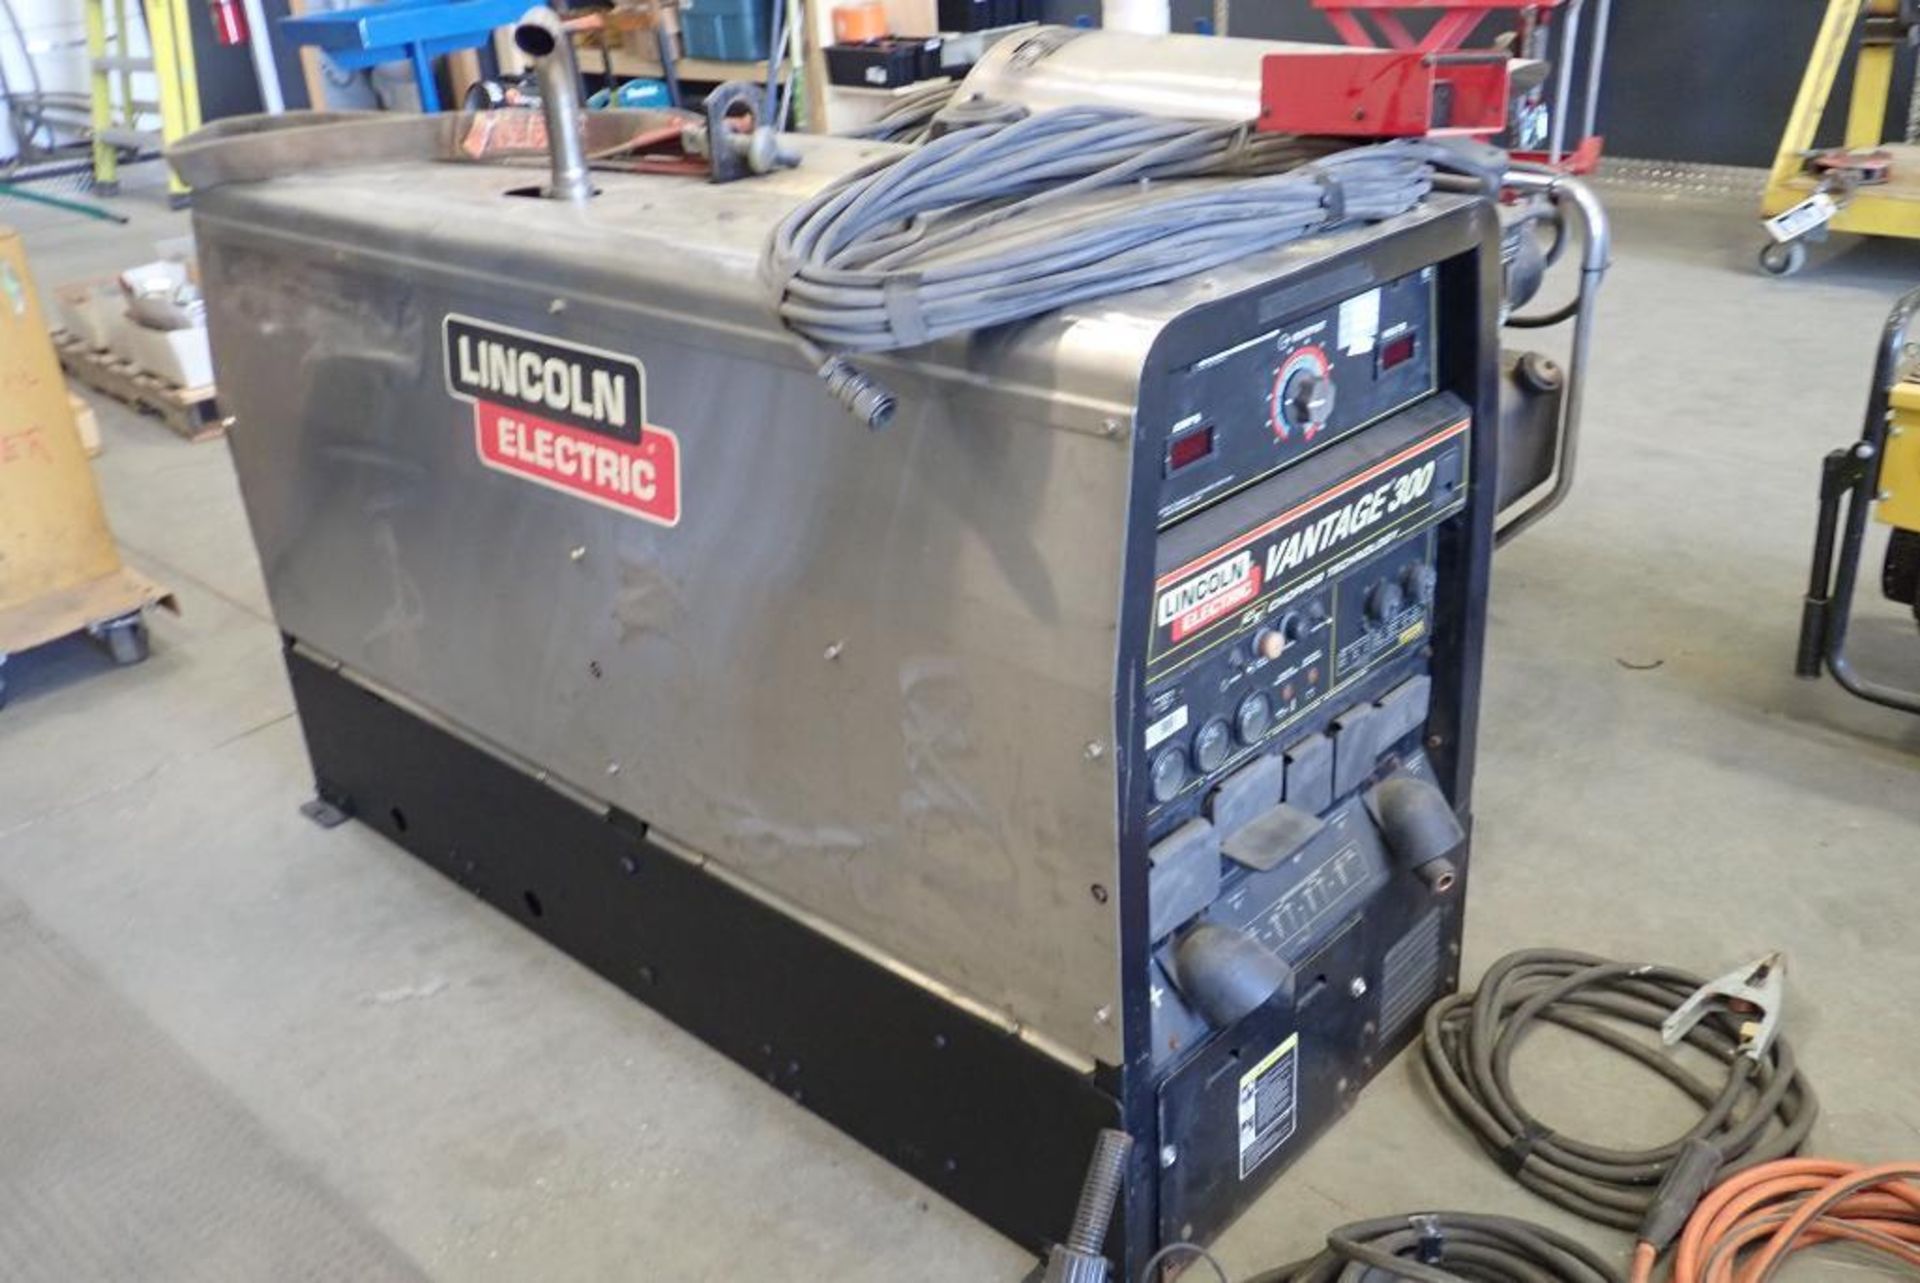 2007 Lincoln Electric Vantage 300 Diesel Portable Welder w/ Remote, Showing 2,079hrs SN U1070908955. - Image 3 of 8